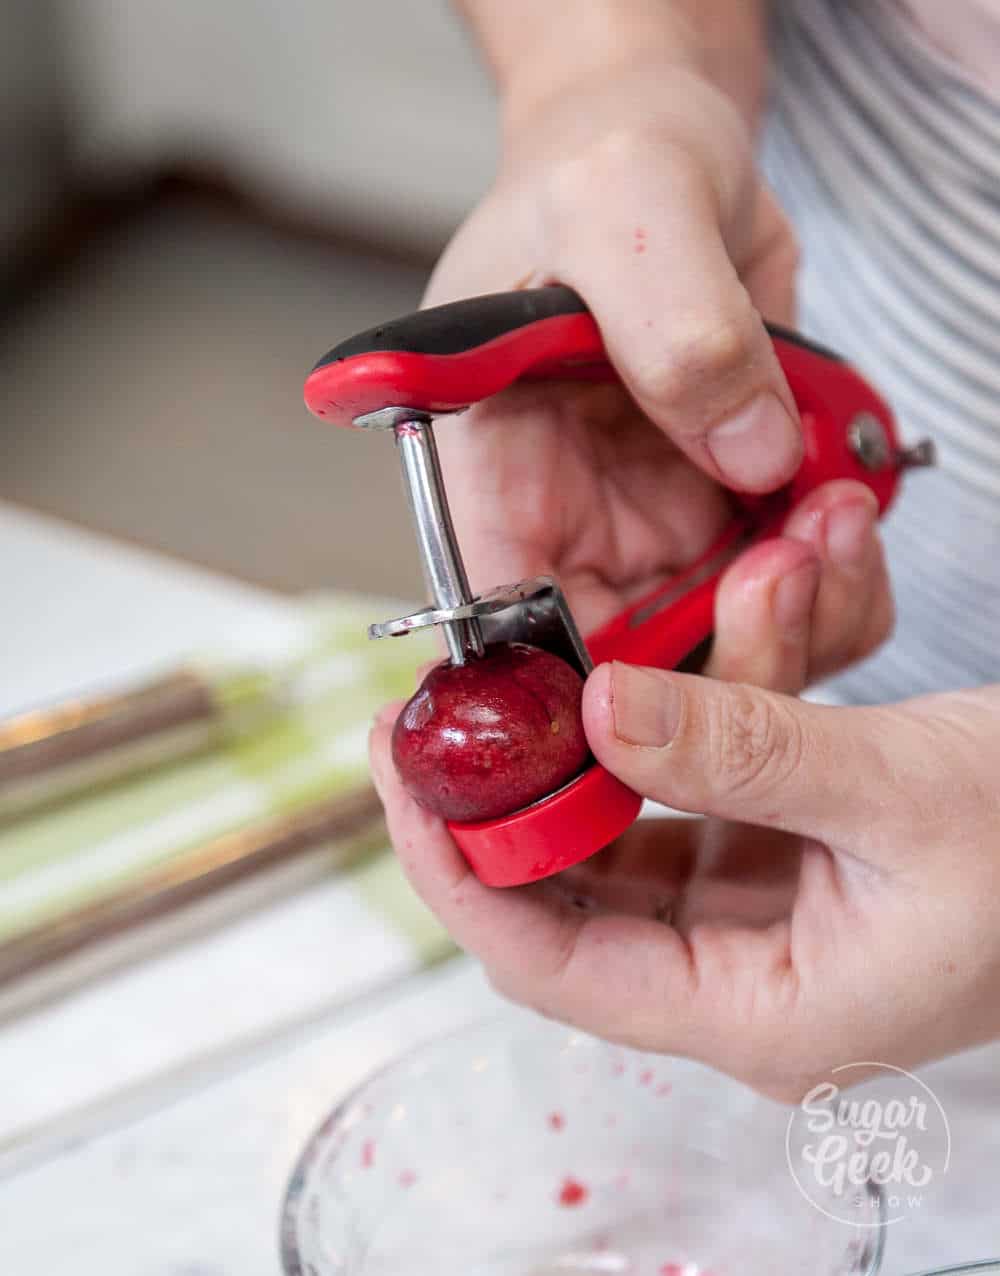 using a cherry pitter to remove the pit from cherries